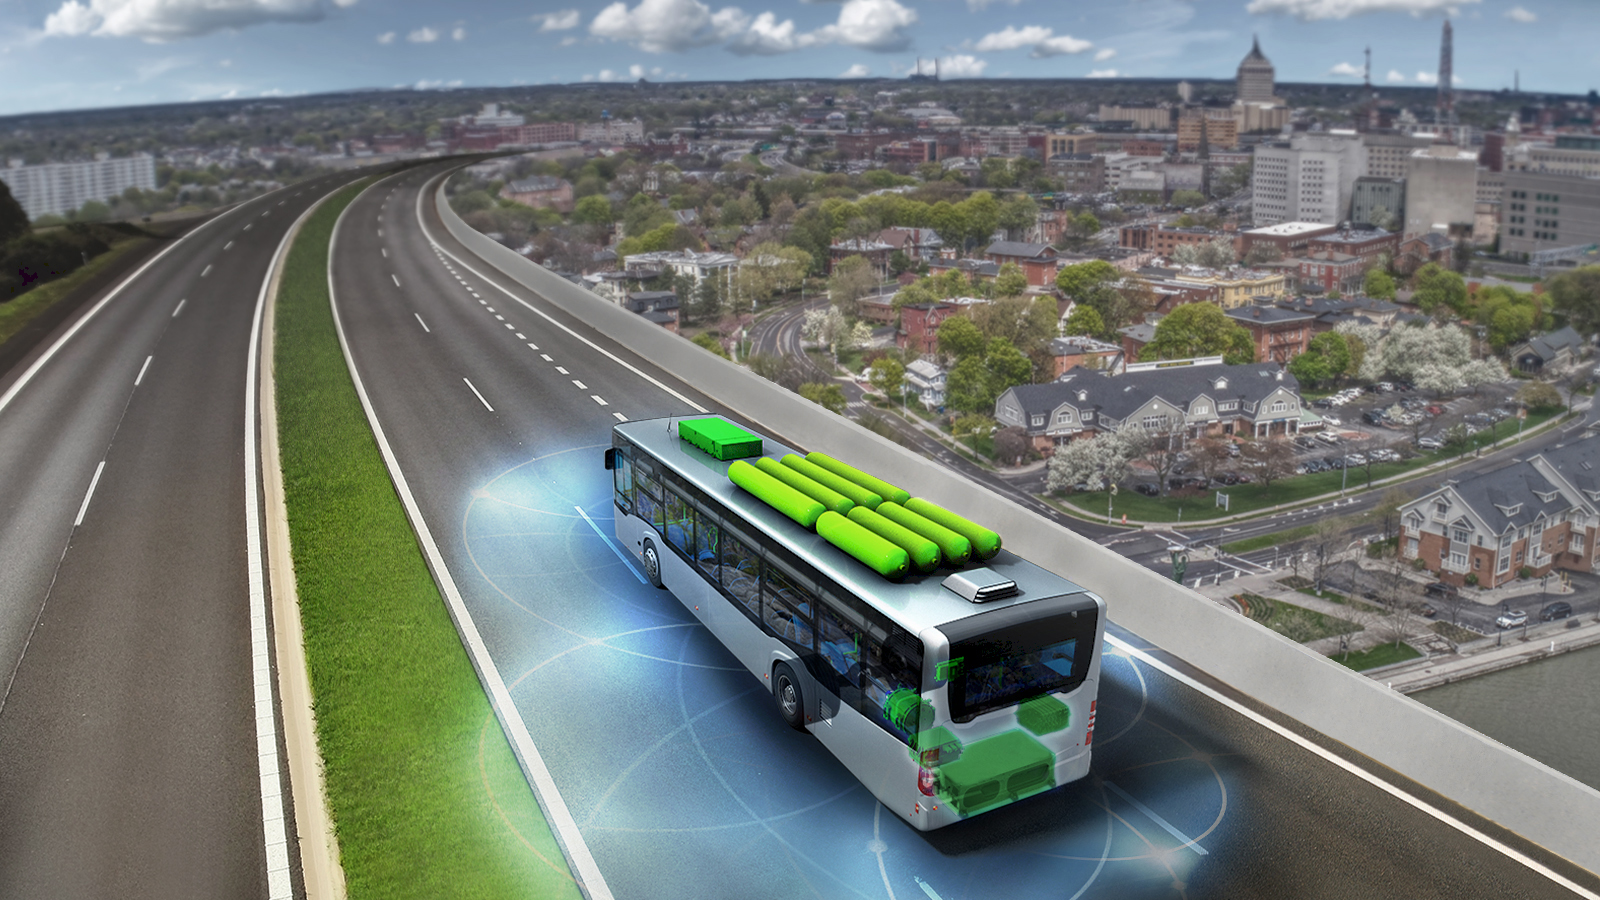 BAE Systems to provide electric drive systems for first fleet of hydrogen fuel cell buses in Rochester, New York